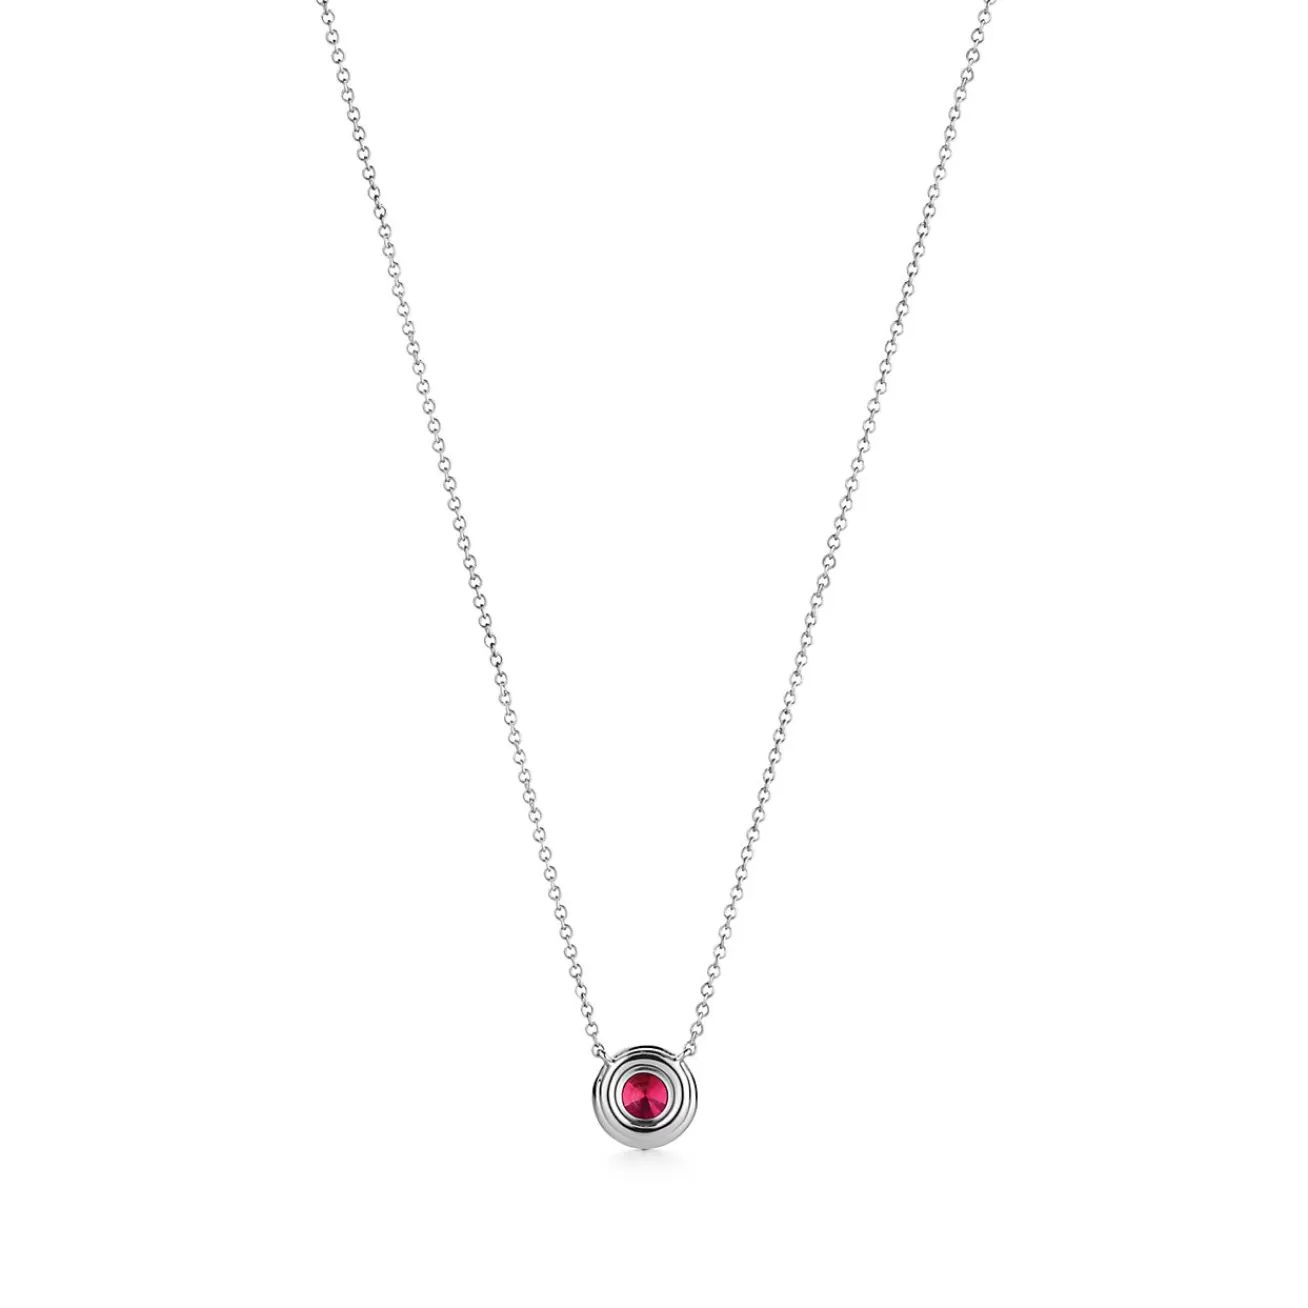 Tiffany & Co. Tiffany Soleste® pendant in platinum with a ruby and diamonds. | ^ Necklaces & Pendants | Platinum Jewelry